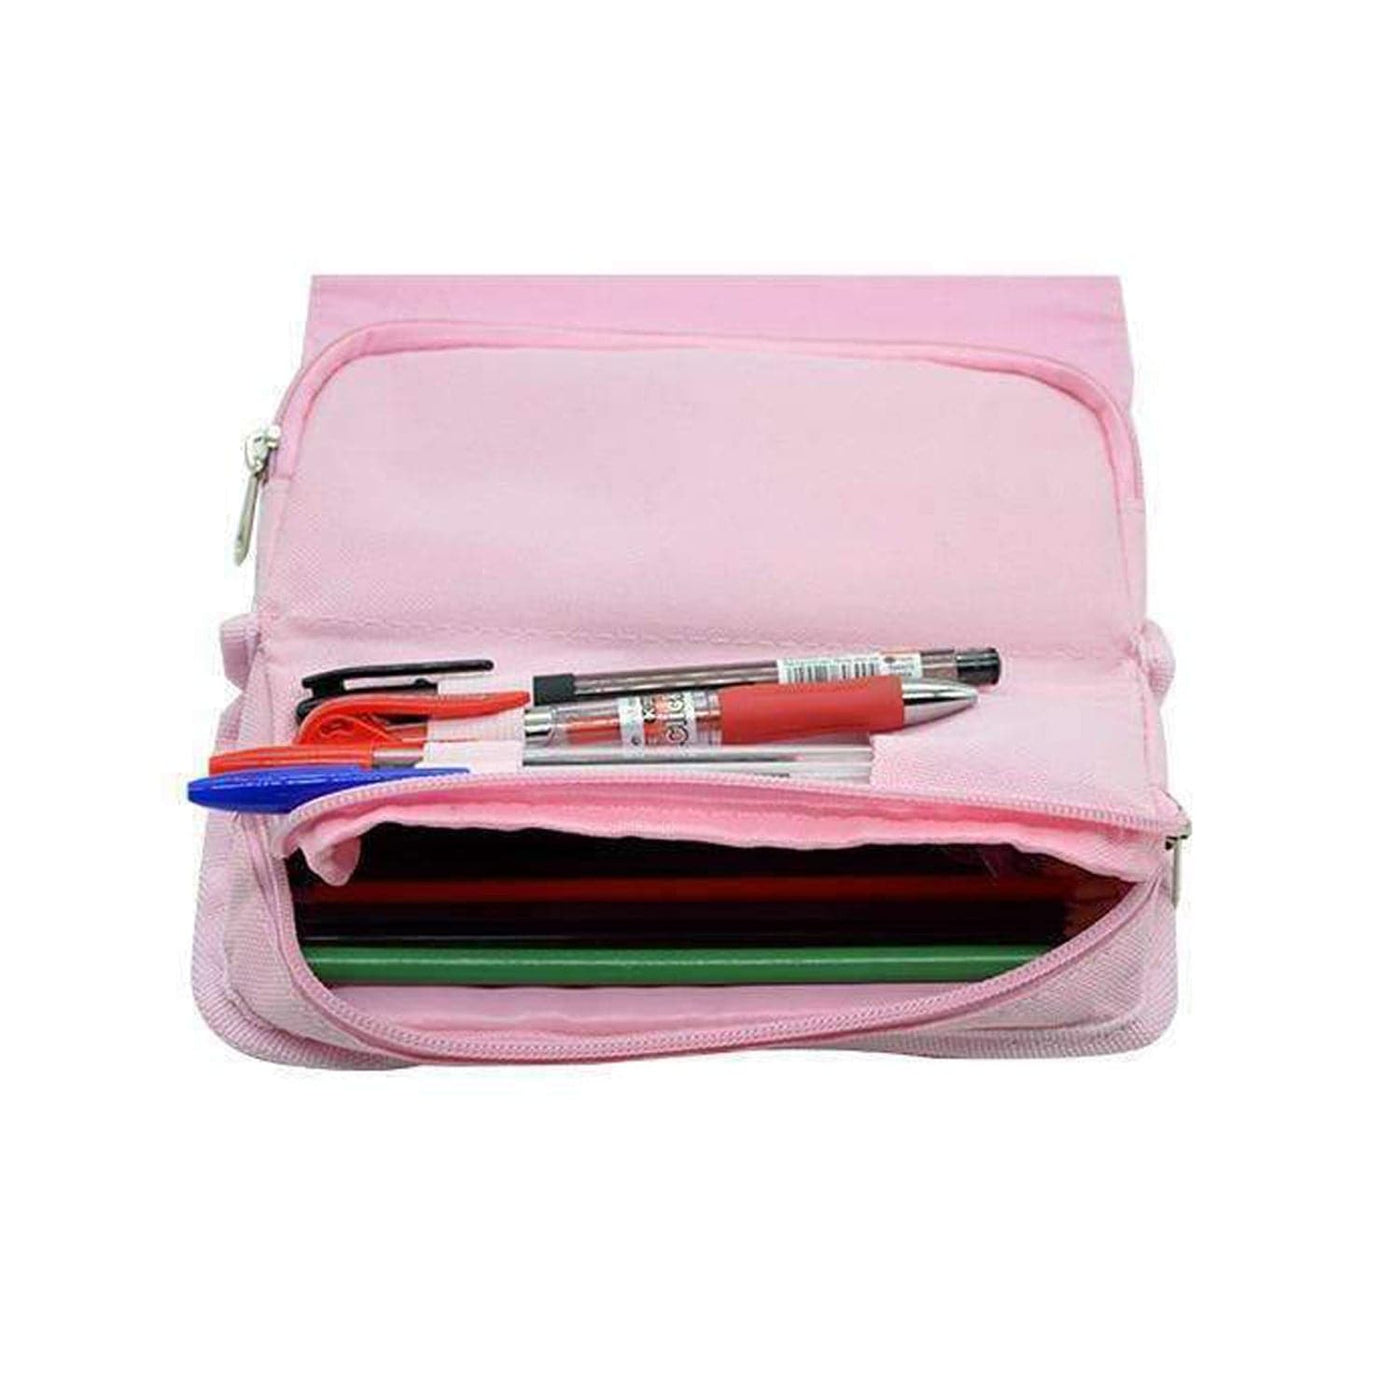 Pretty Pink Chic Floral Pattern Pencil Case